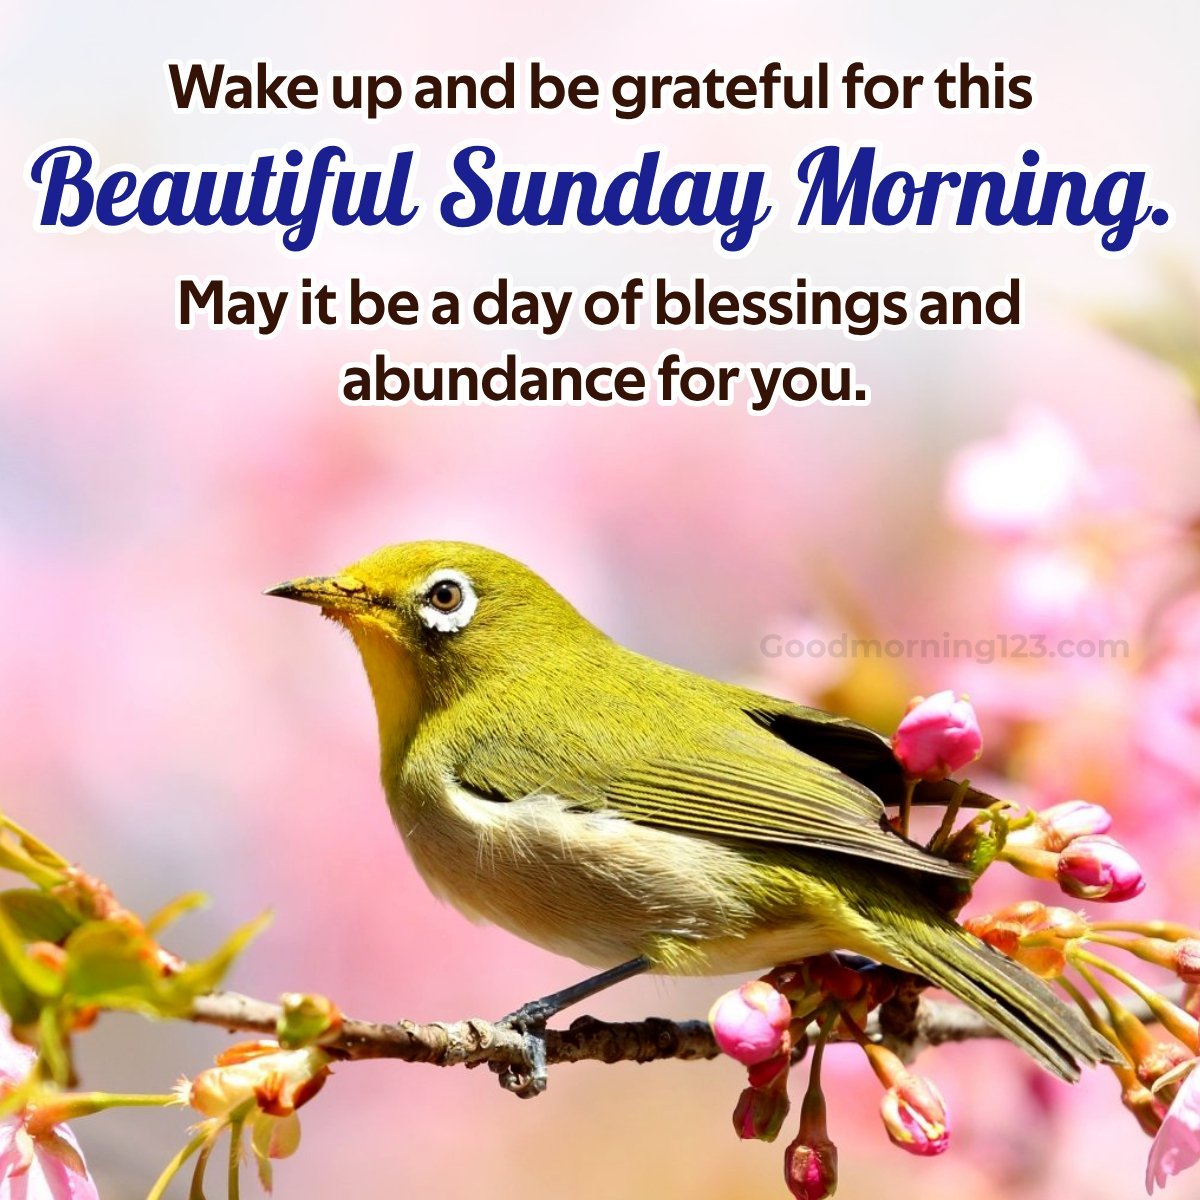 Good Morning Sunday Images, Wishes, Greetings & GIFs